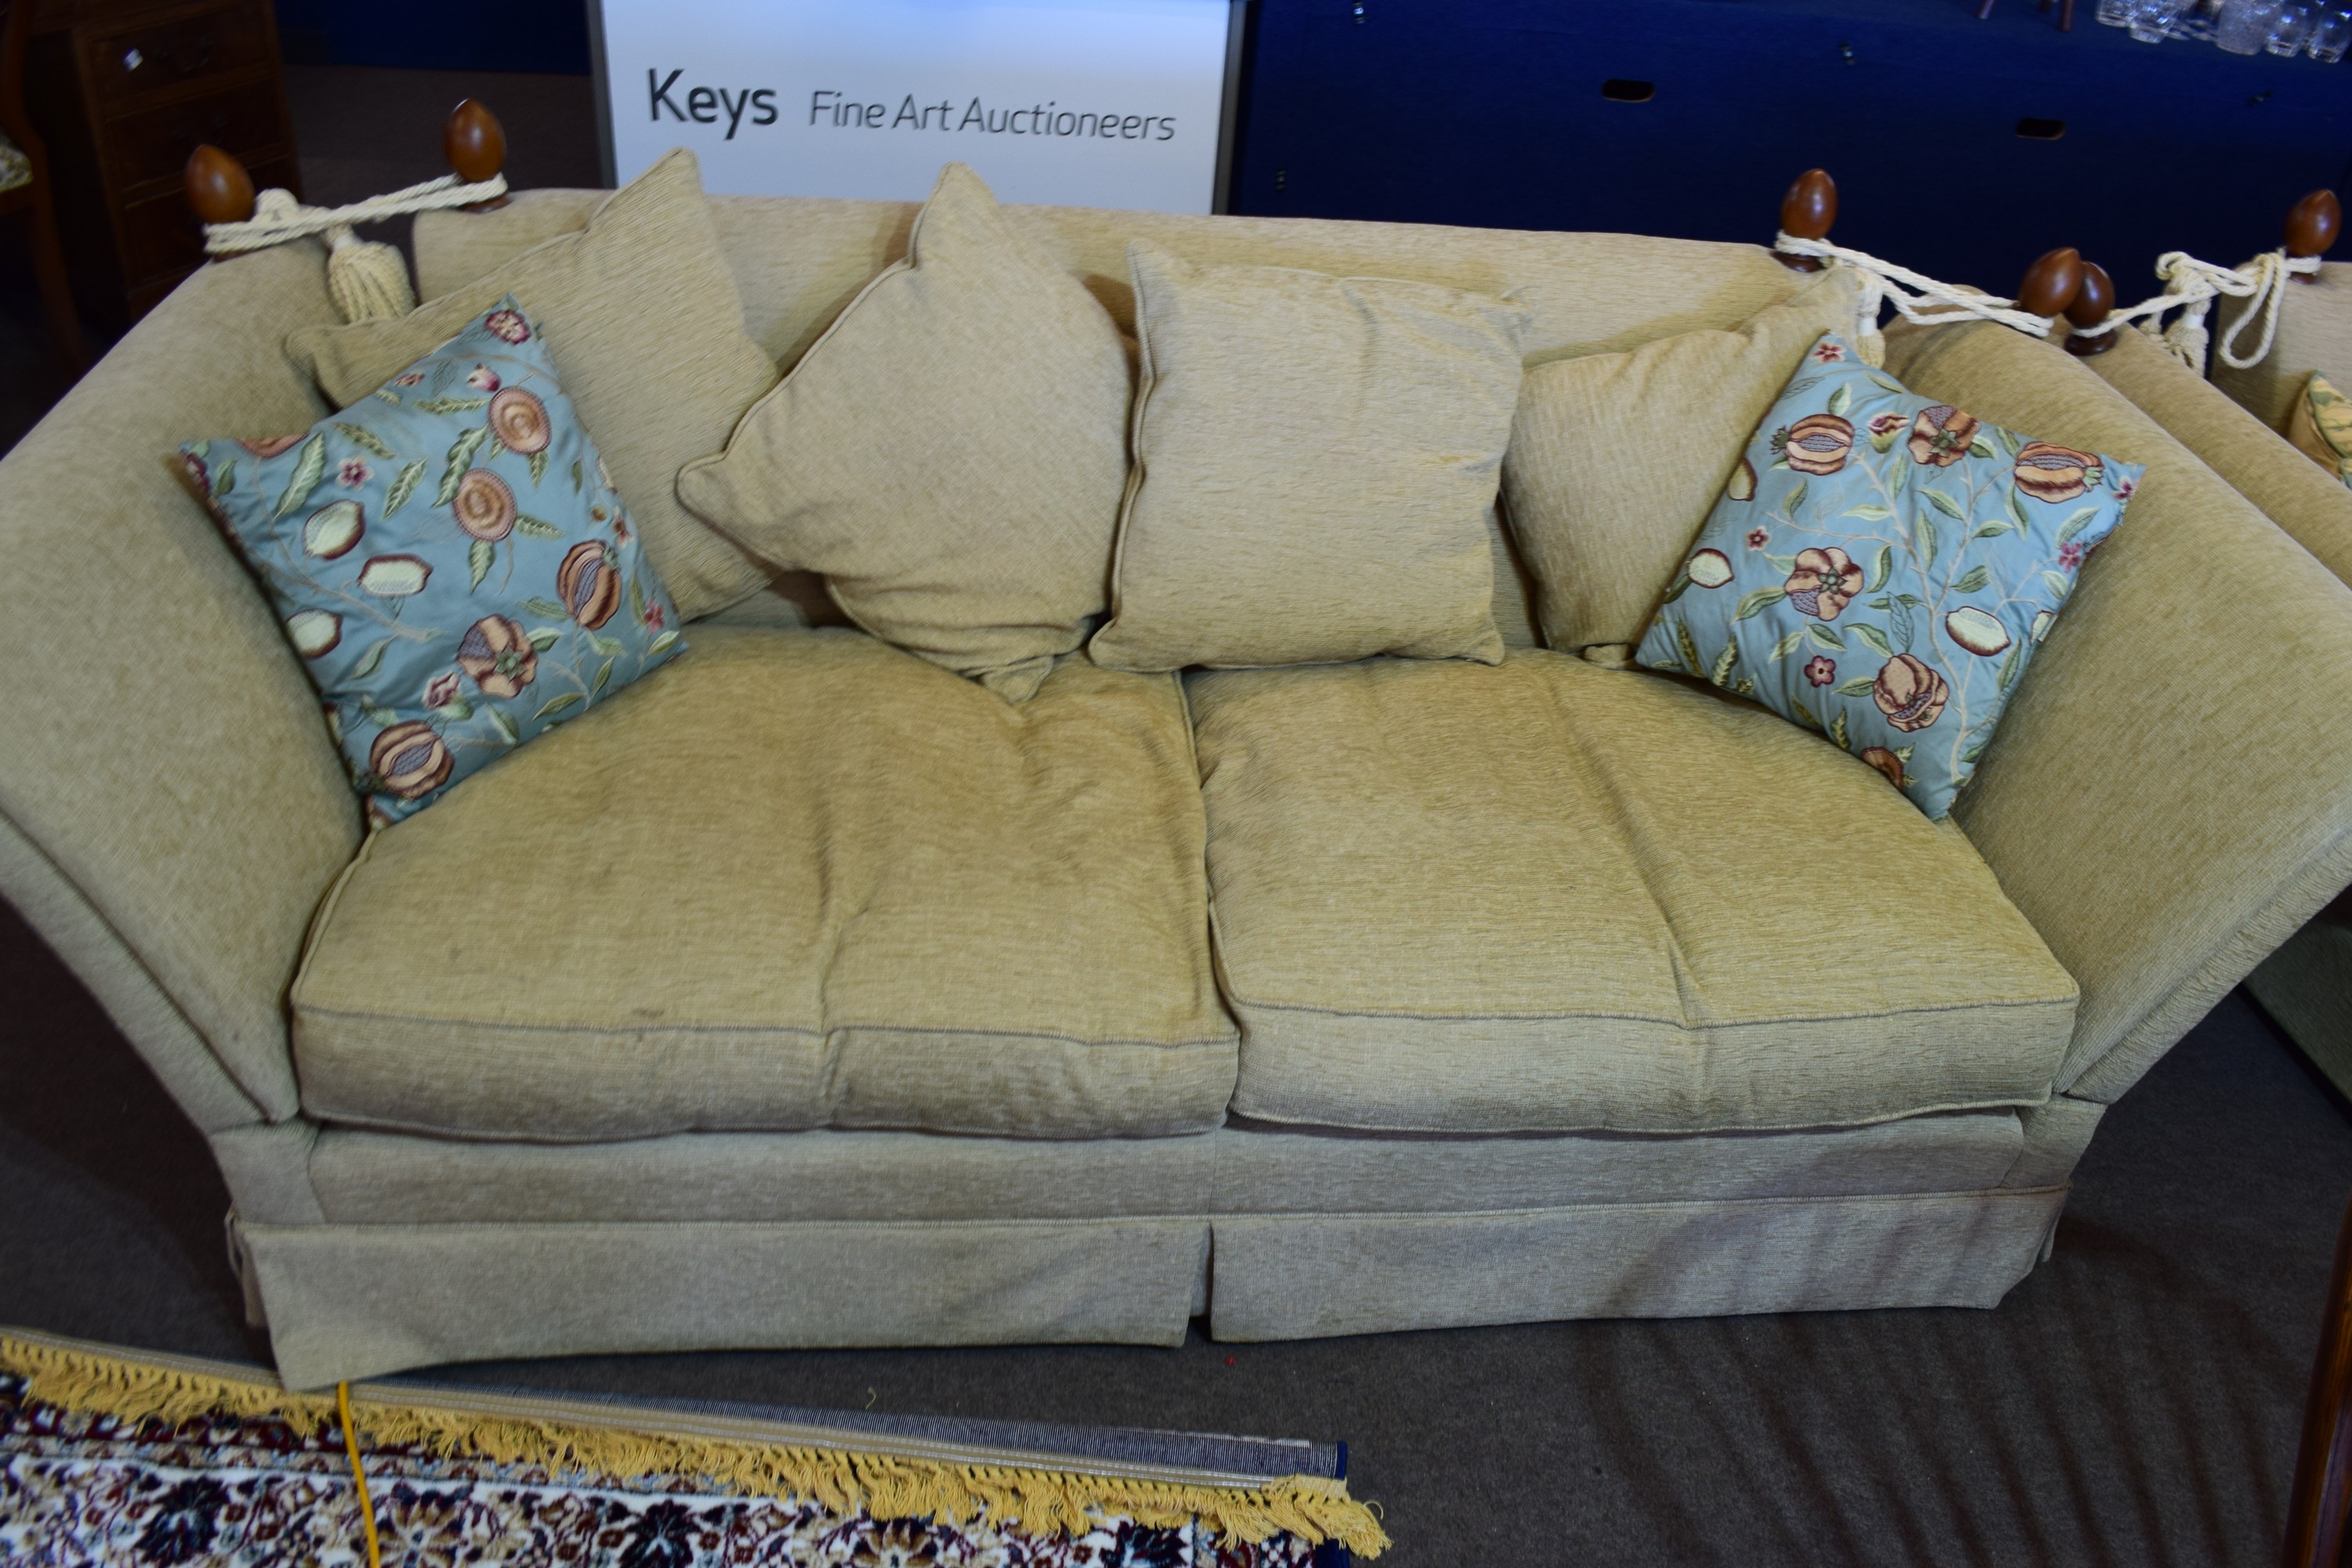 20th century Knole style two/three seater settee upholstered in beige fabric, having rope tied - Image 2 of 2